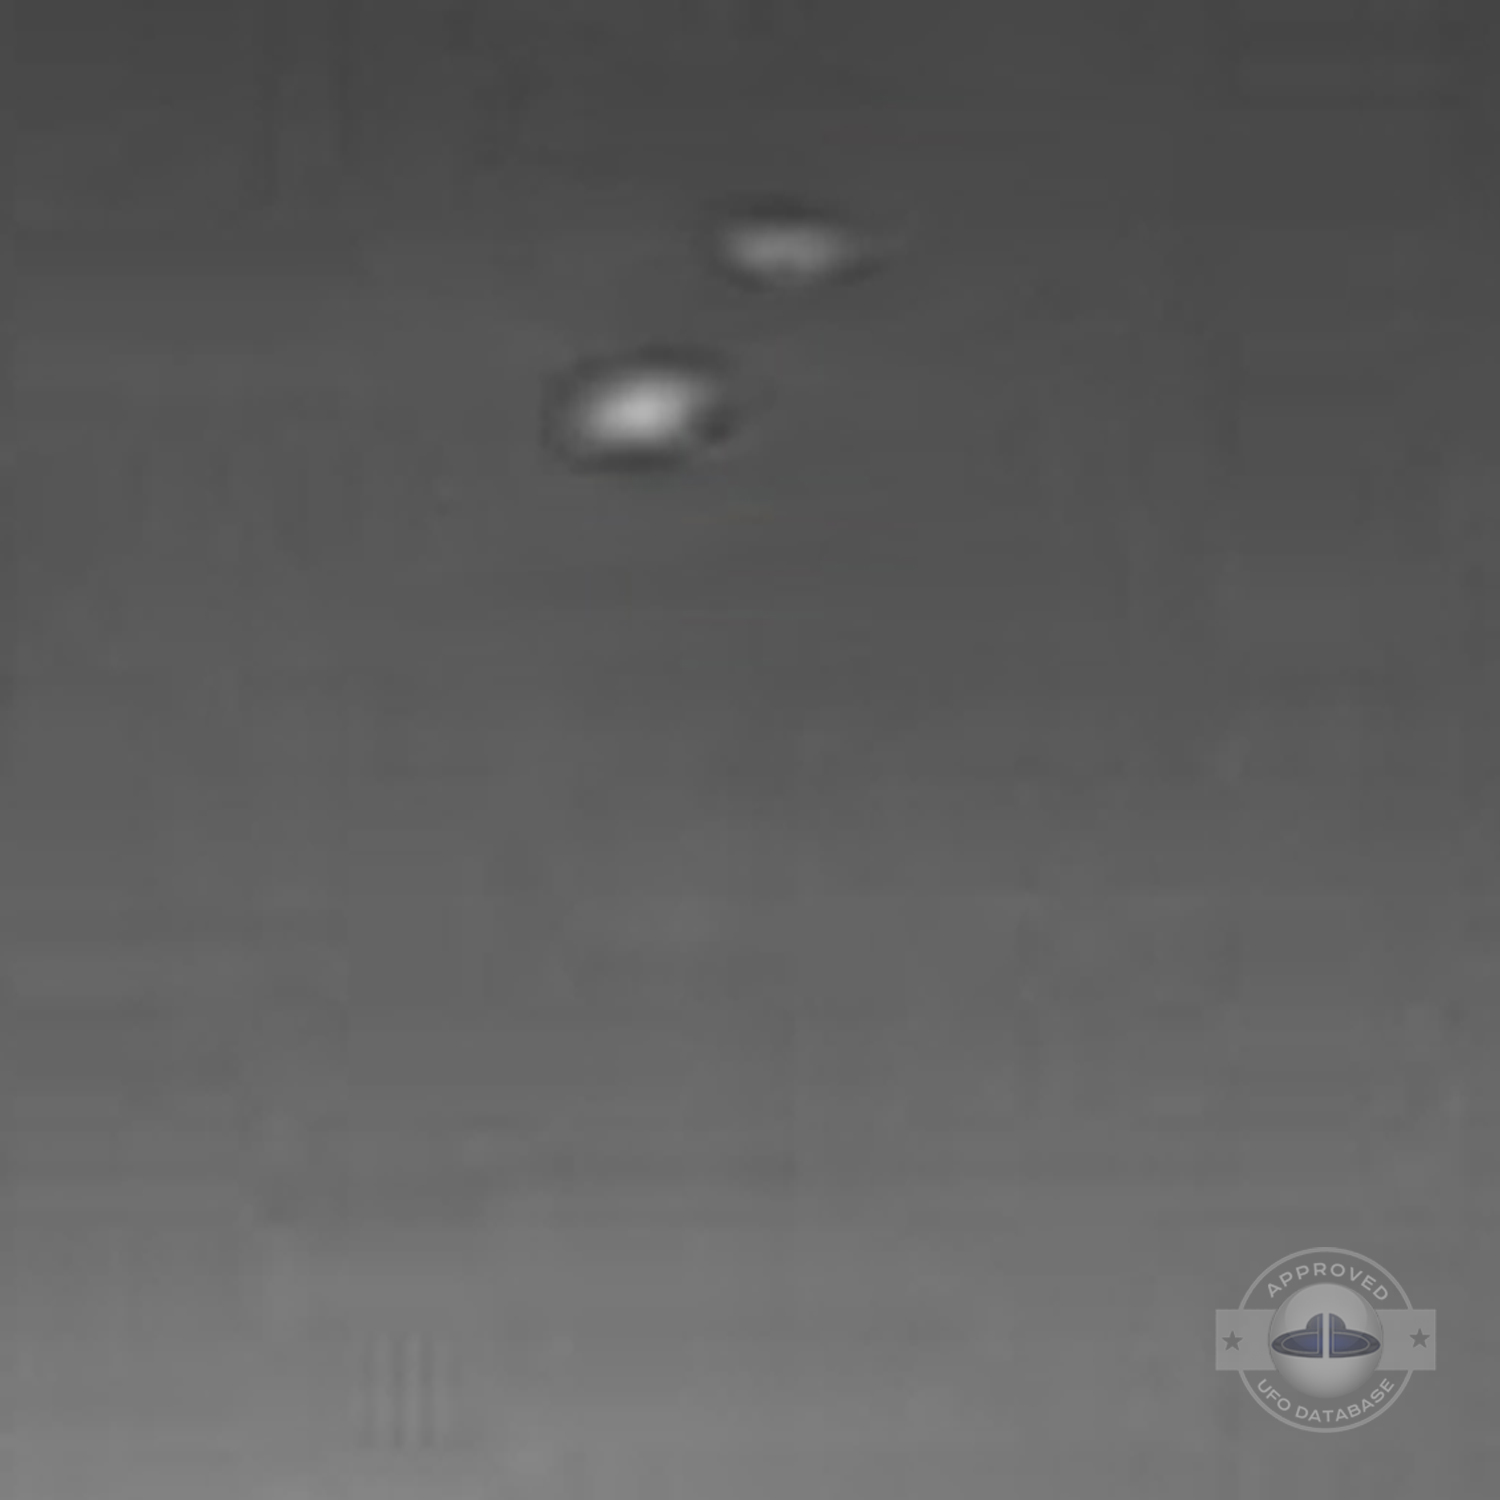 China UFO Sighting | Kunming, Yunnan UFO picture | October 14 2010 UFO Picture #151-4